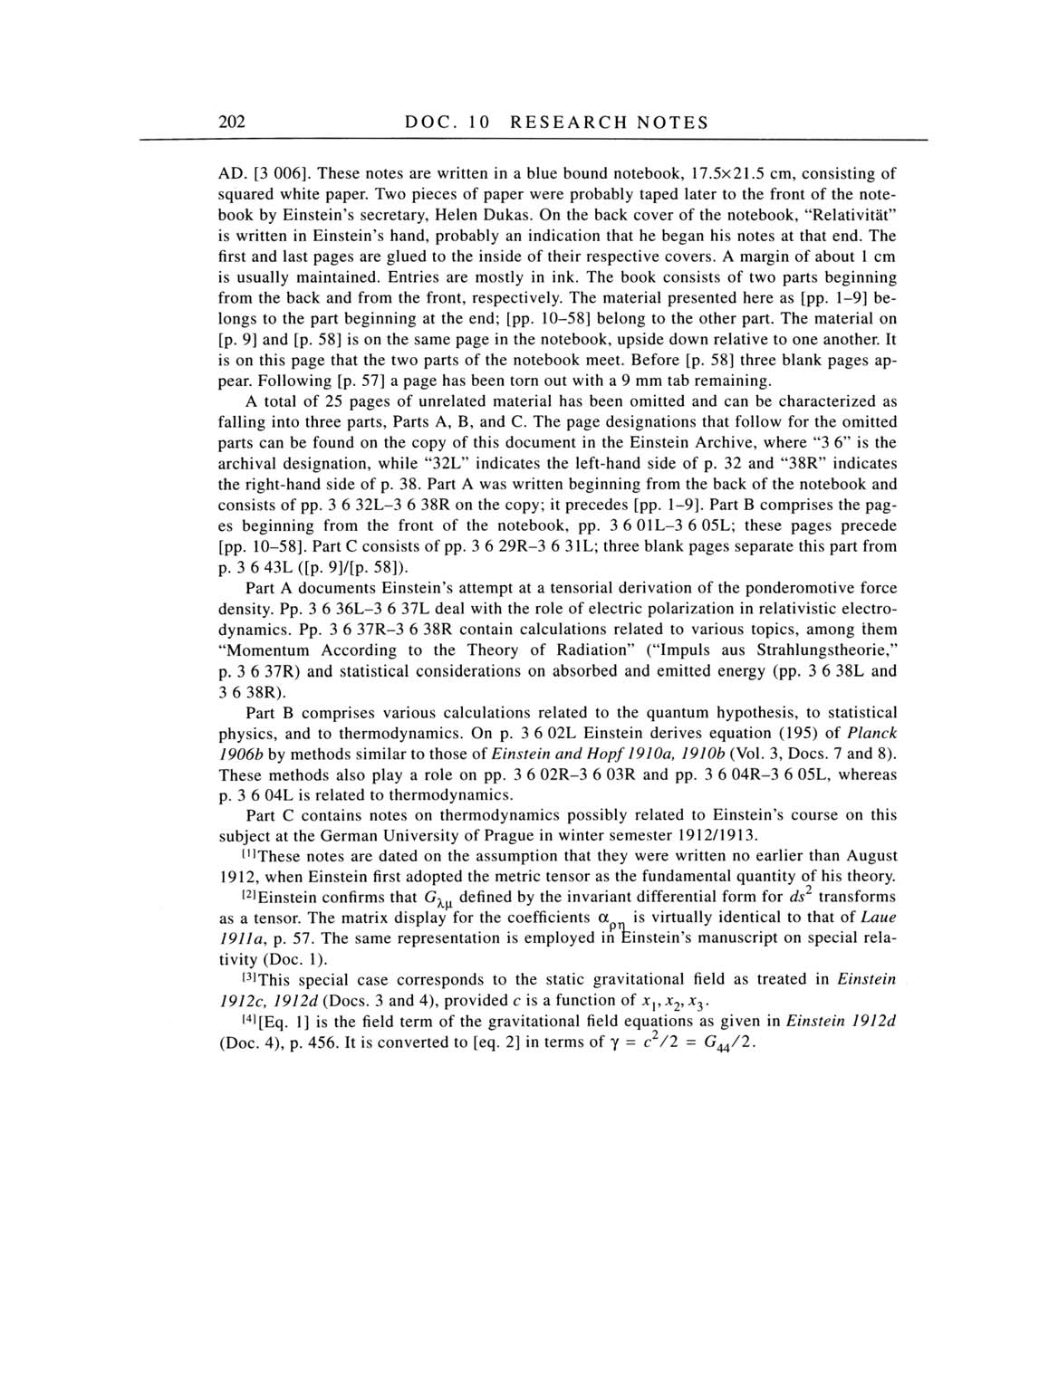 Volume 4: The Swiss Years: Writings 1912-1914 page 202